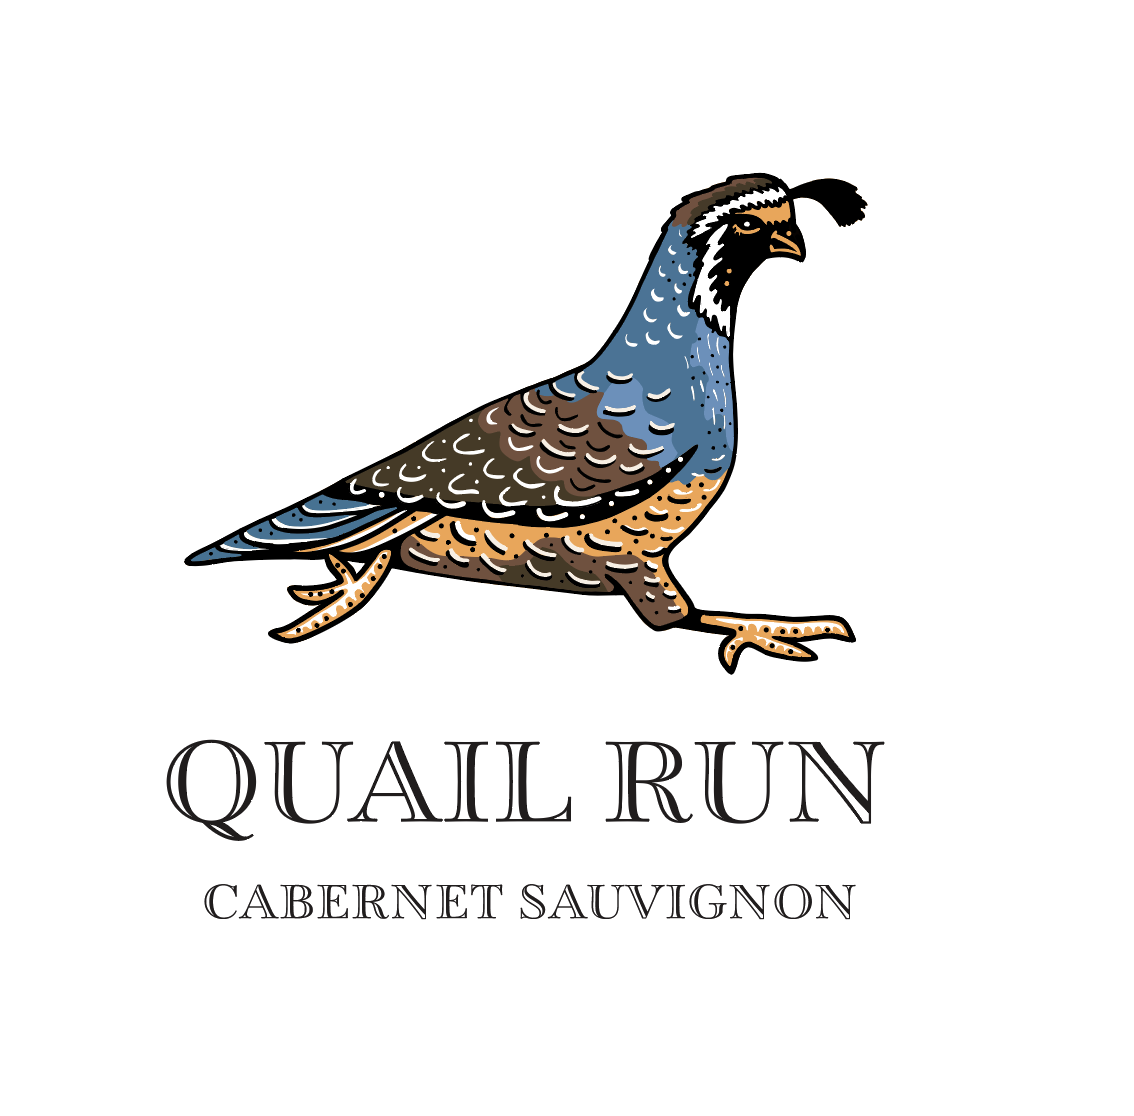 Quail Run full logo logo design by logo designer Made By Lisa Marie for your inspiration and for the worlds largest logo competition